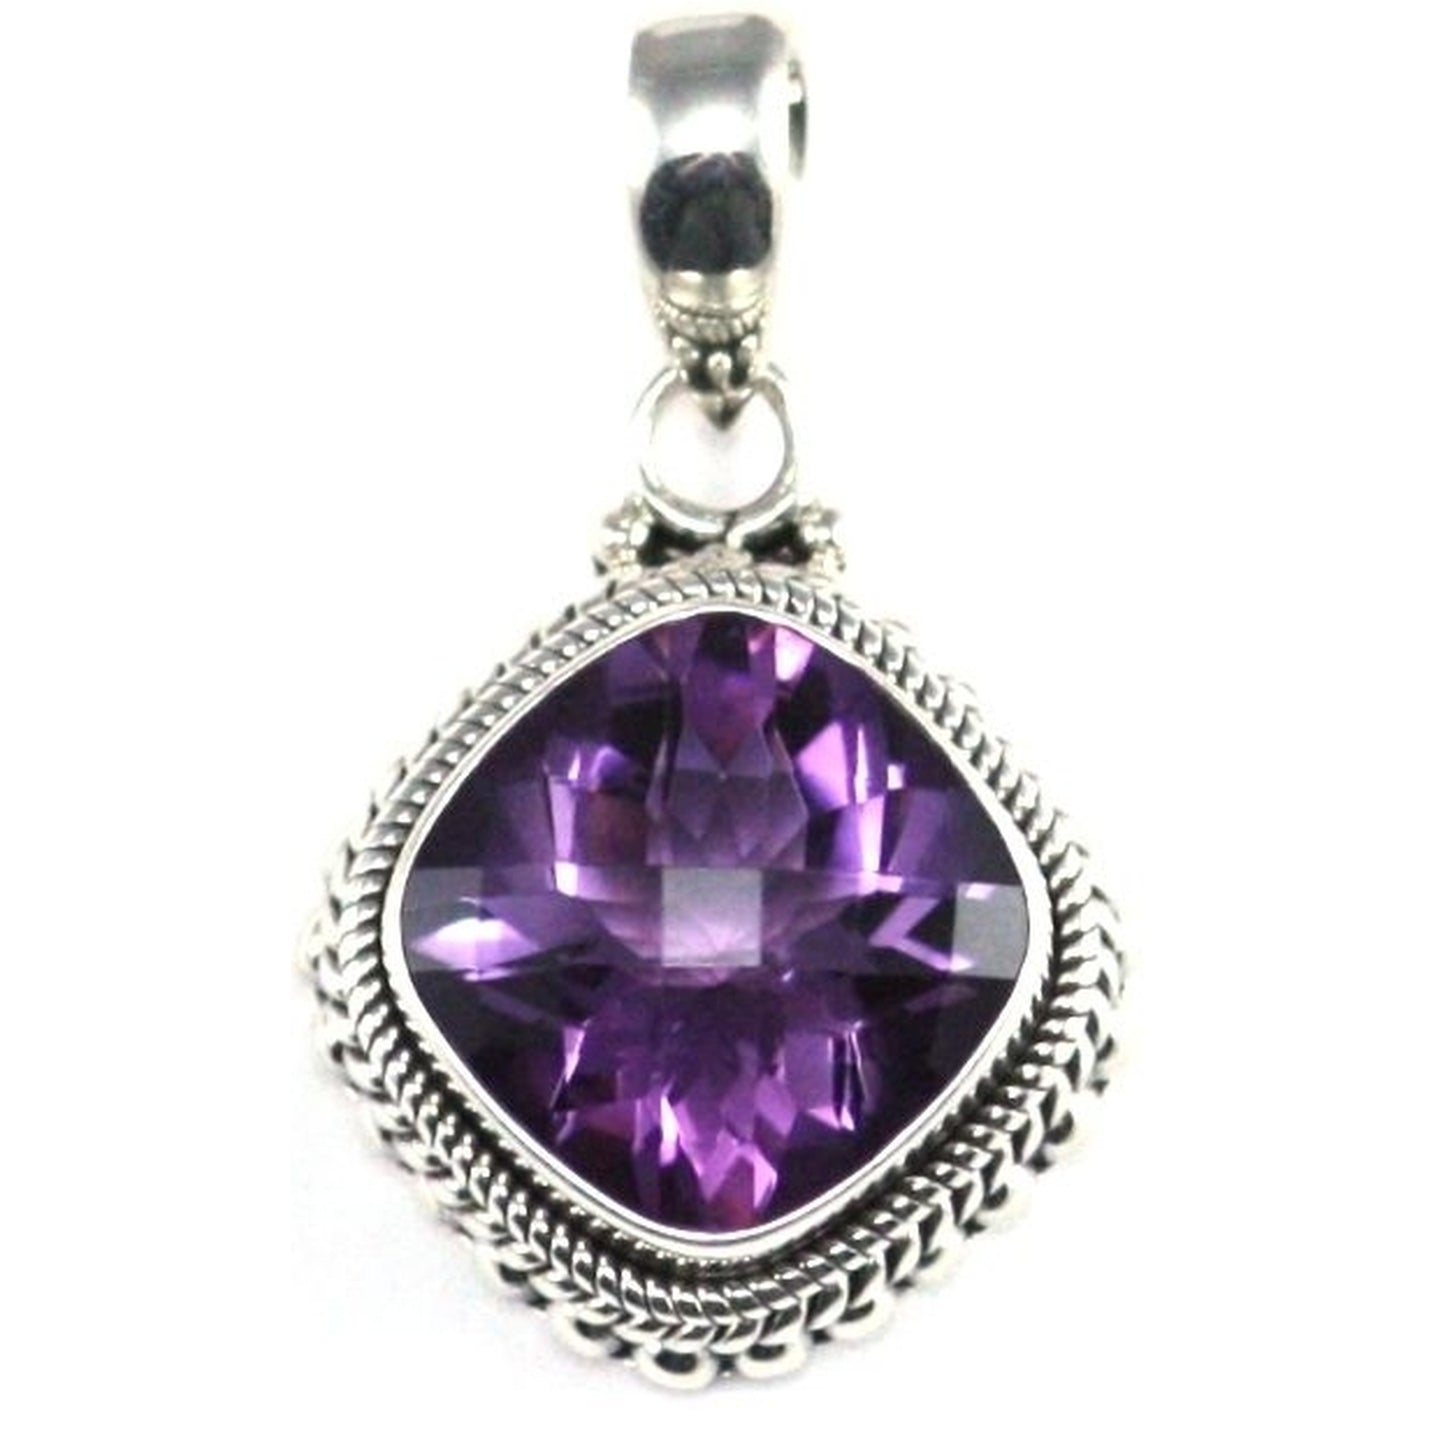 Silver pendant with large square amethyst gemstone.